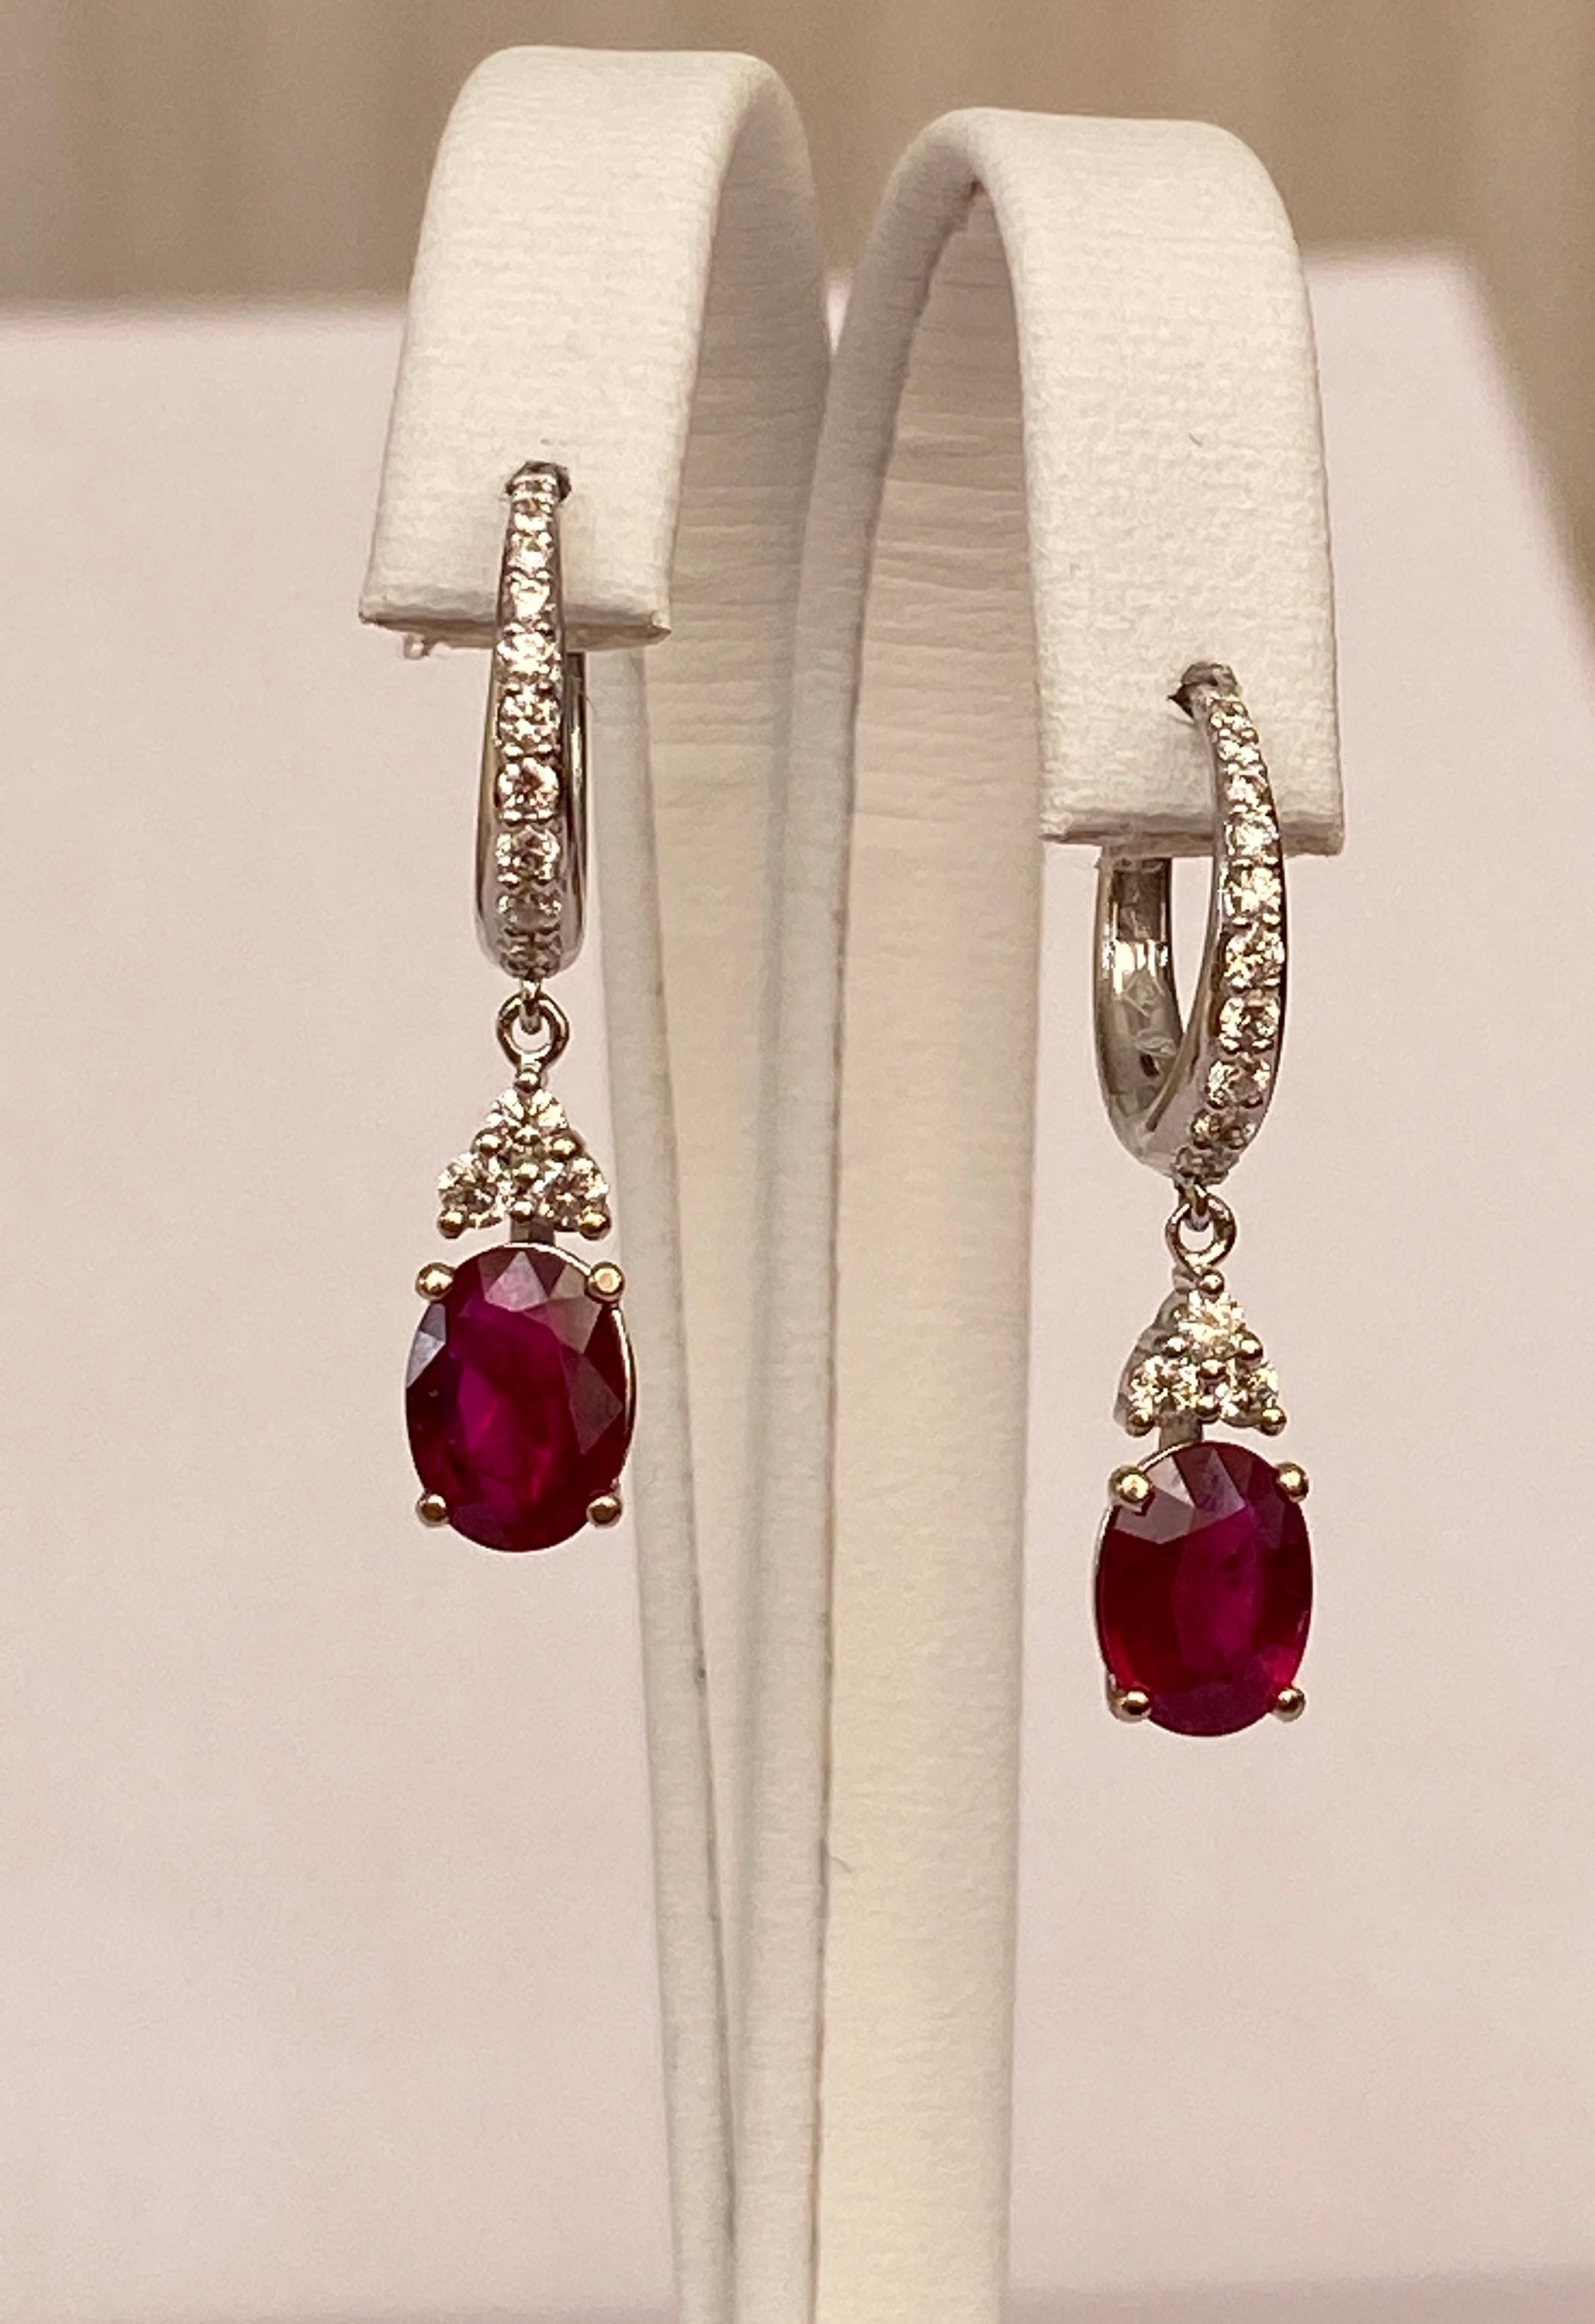 Offered earrings in white gold, with two oval cut rubies 2.28 carat. The stones are surrounded by an entourage of 28 pieces of brilliant cut diamonds, approx. 0.50 ct in total, of quality G/VS. ALGT certificate is included. Number is 73566933.
Gold